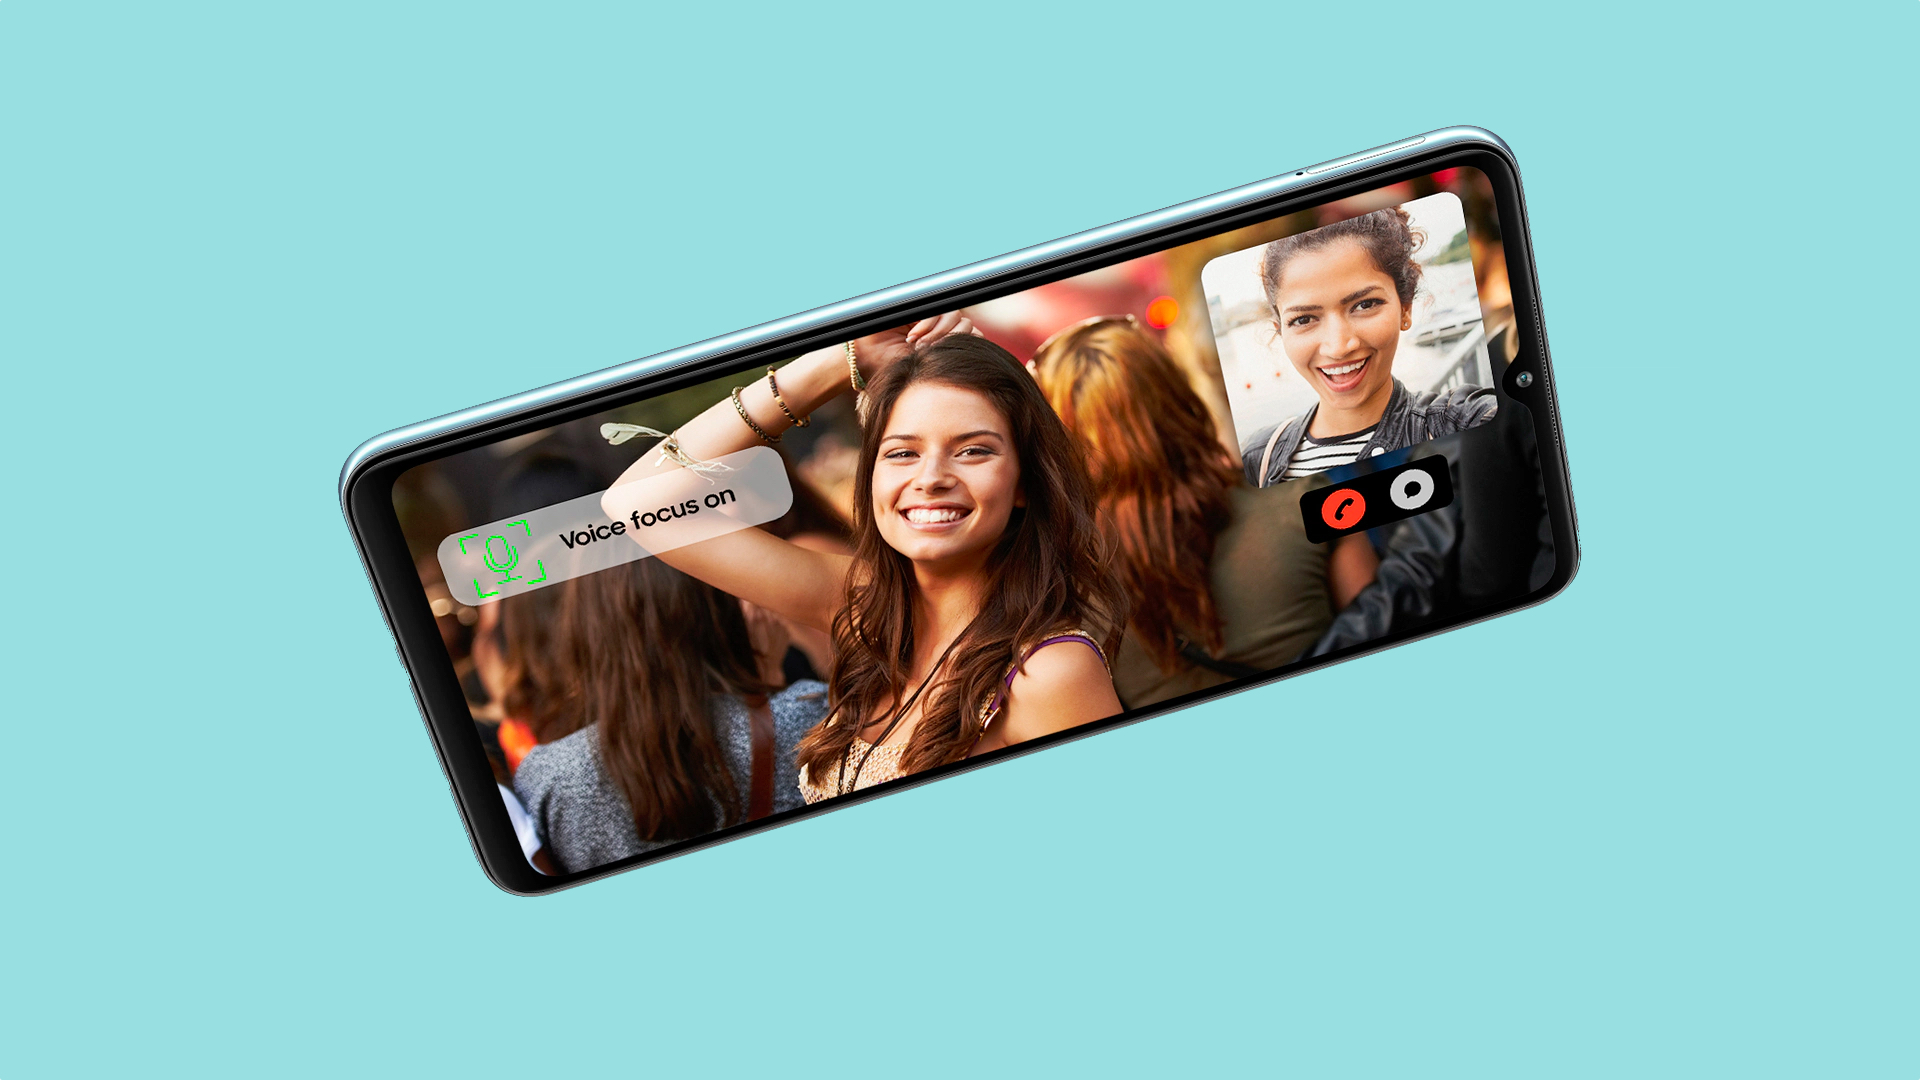 Samsung brings better call quality to more mid-range phones with Voice Focus - SamMobile - Samsung news